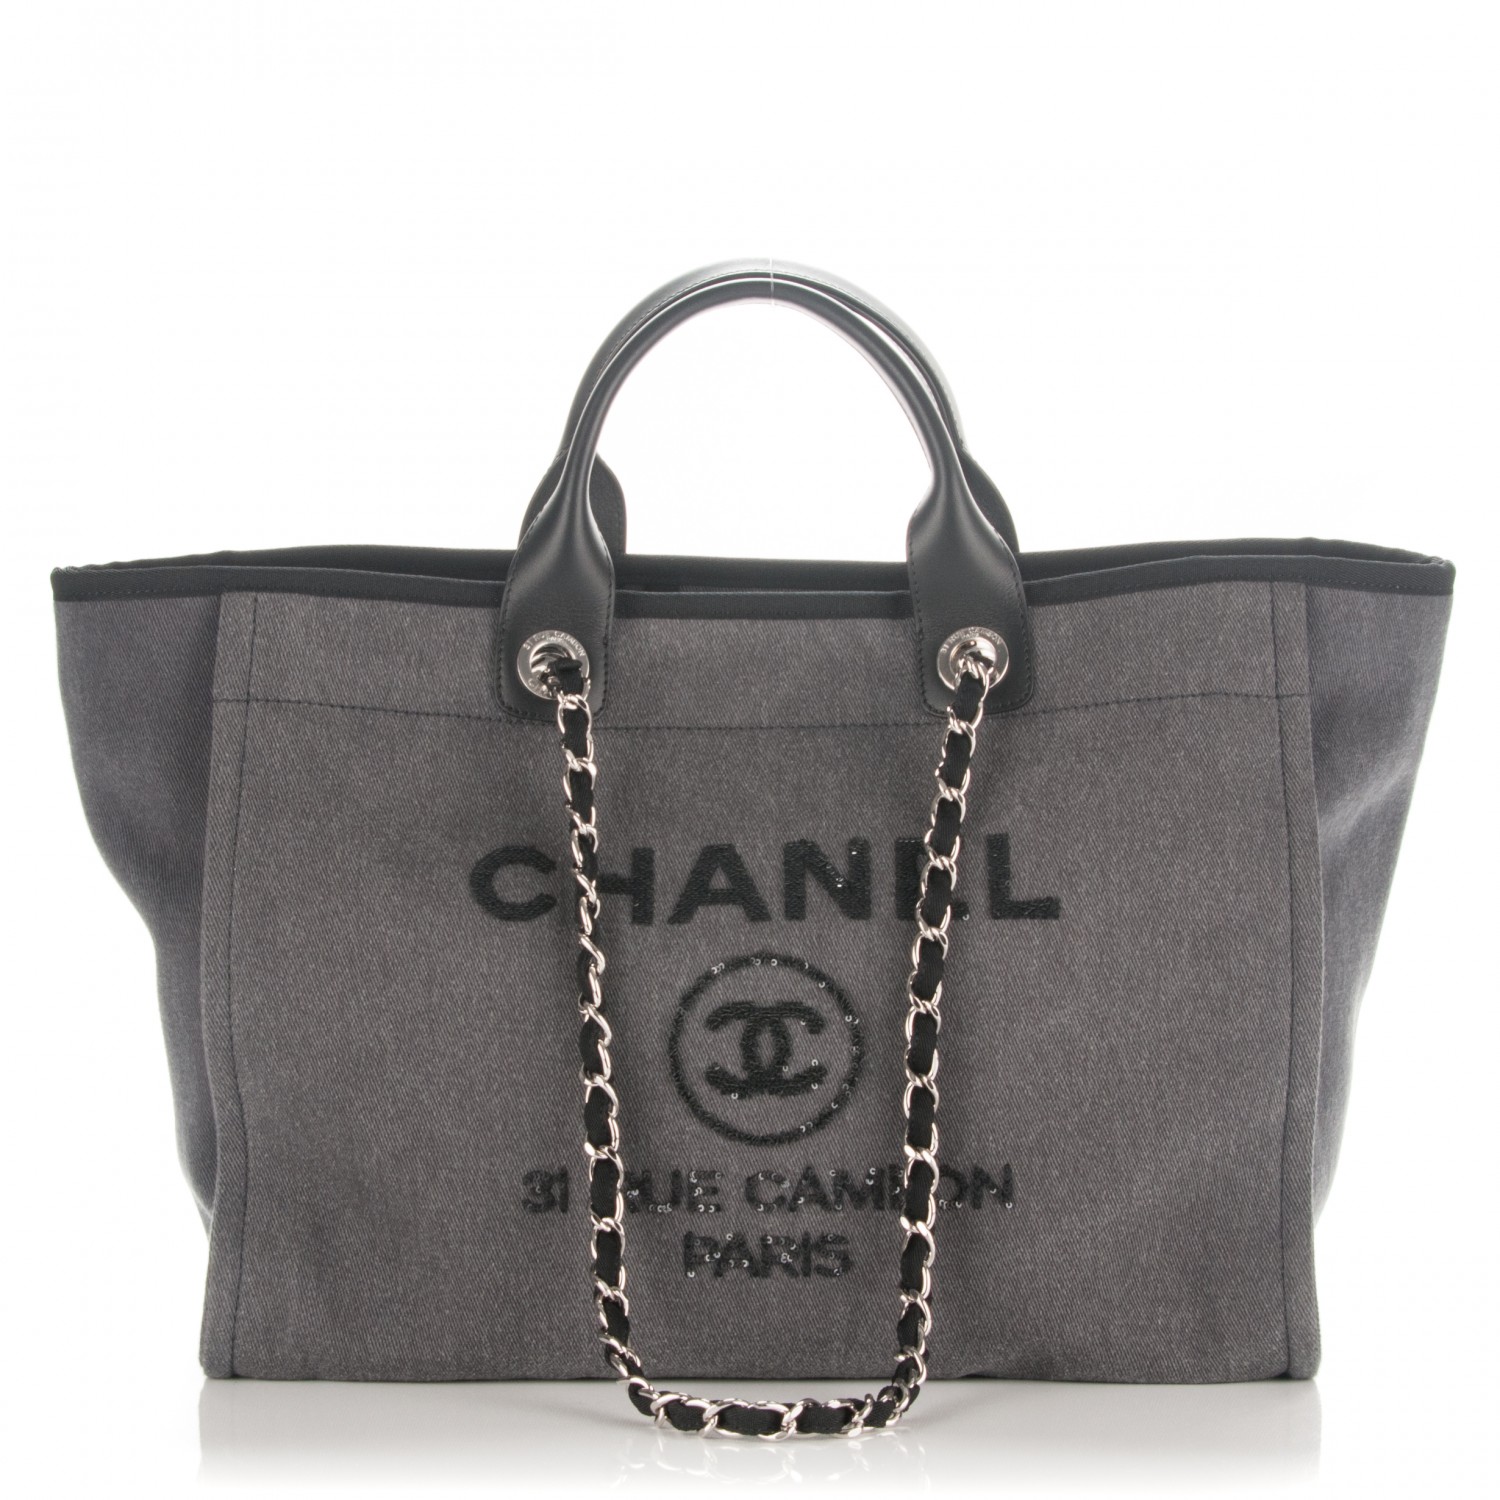 CHANEL Canvas Sequin Large Deauville Tote Charcoal 178790